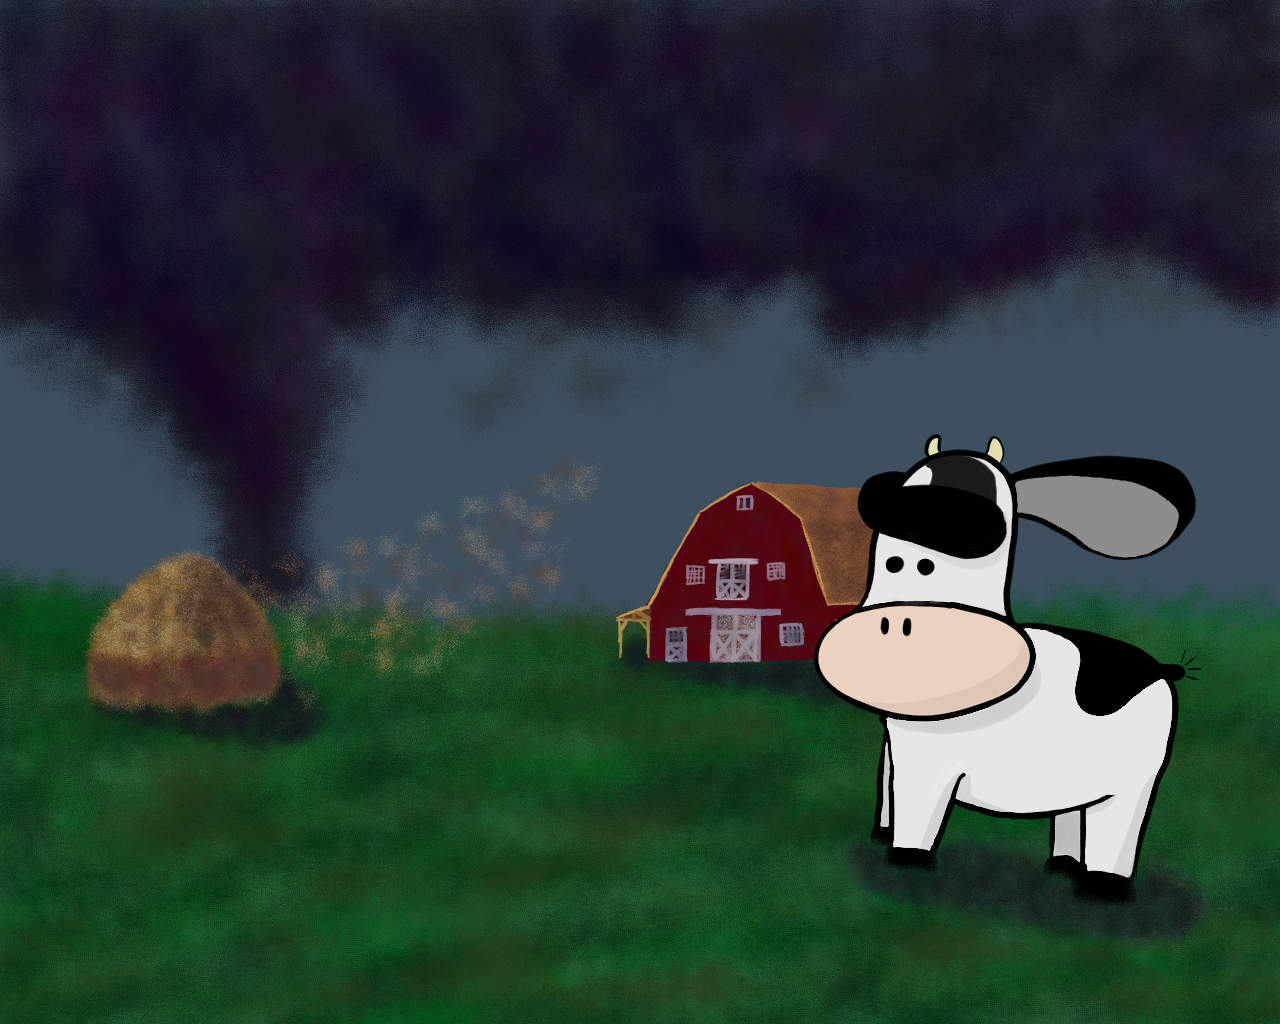 A cow, Moo, in a field with a barn, hay stack, and tornado in the distance.